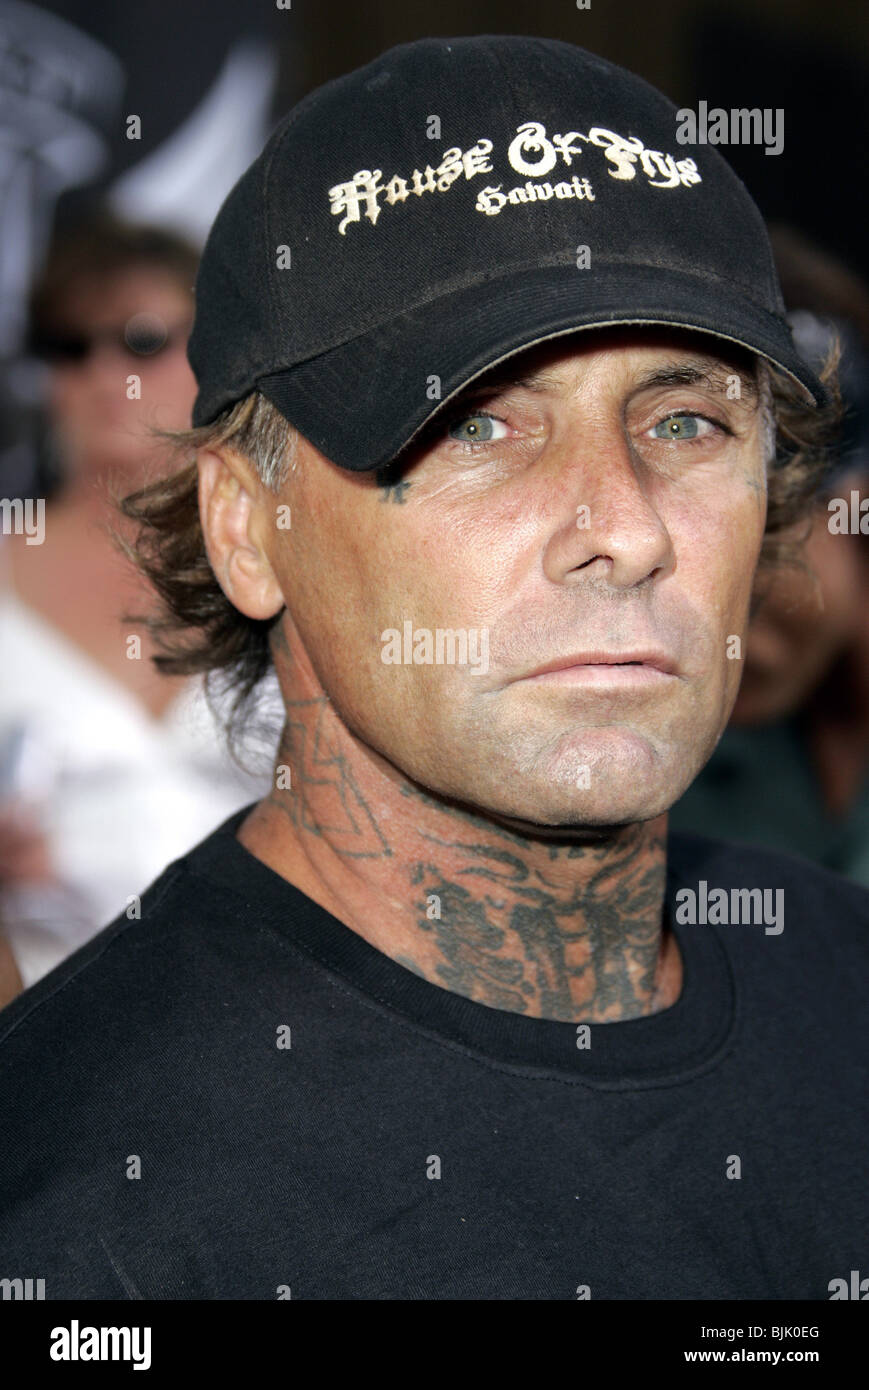 24 May 2005 - Hollywood, California - Jay Adams. Lords Of Dogtown World  Premiere at the Mann's Chinese Theatre. Photo Credit: Giulio Marcocchi/Sipa  Press/0505250917 Stock Photo - Alamy